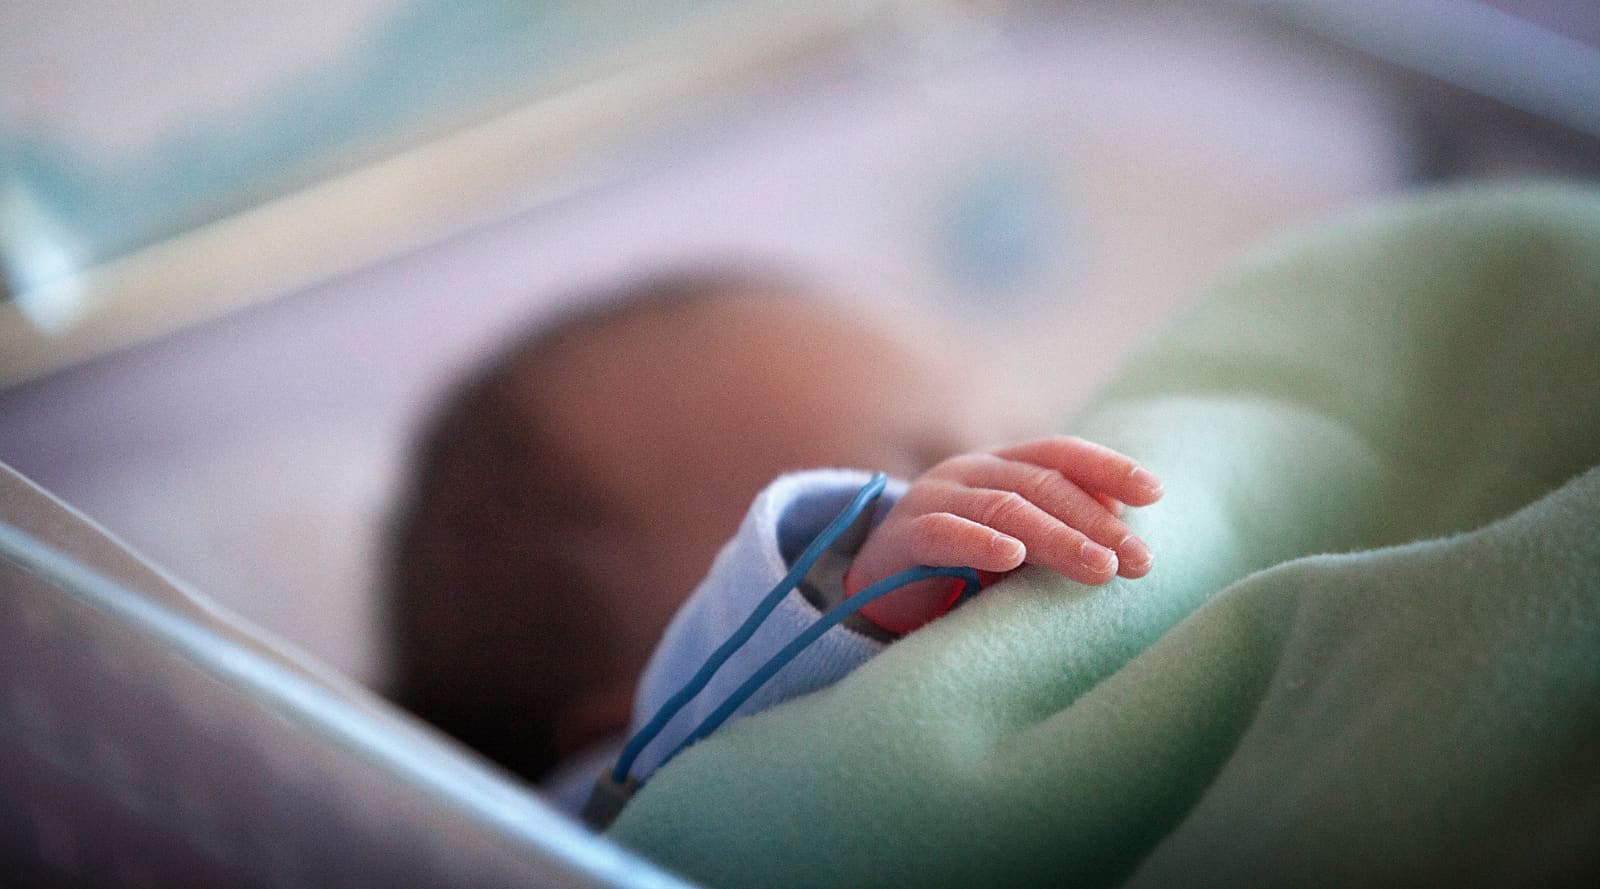 A mother's breast milk may help premature babies catch-up in growth